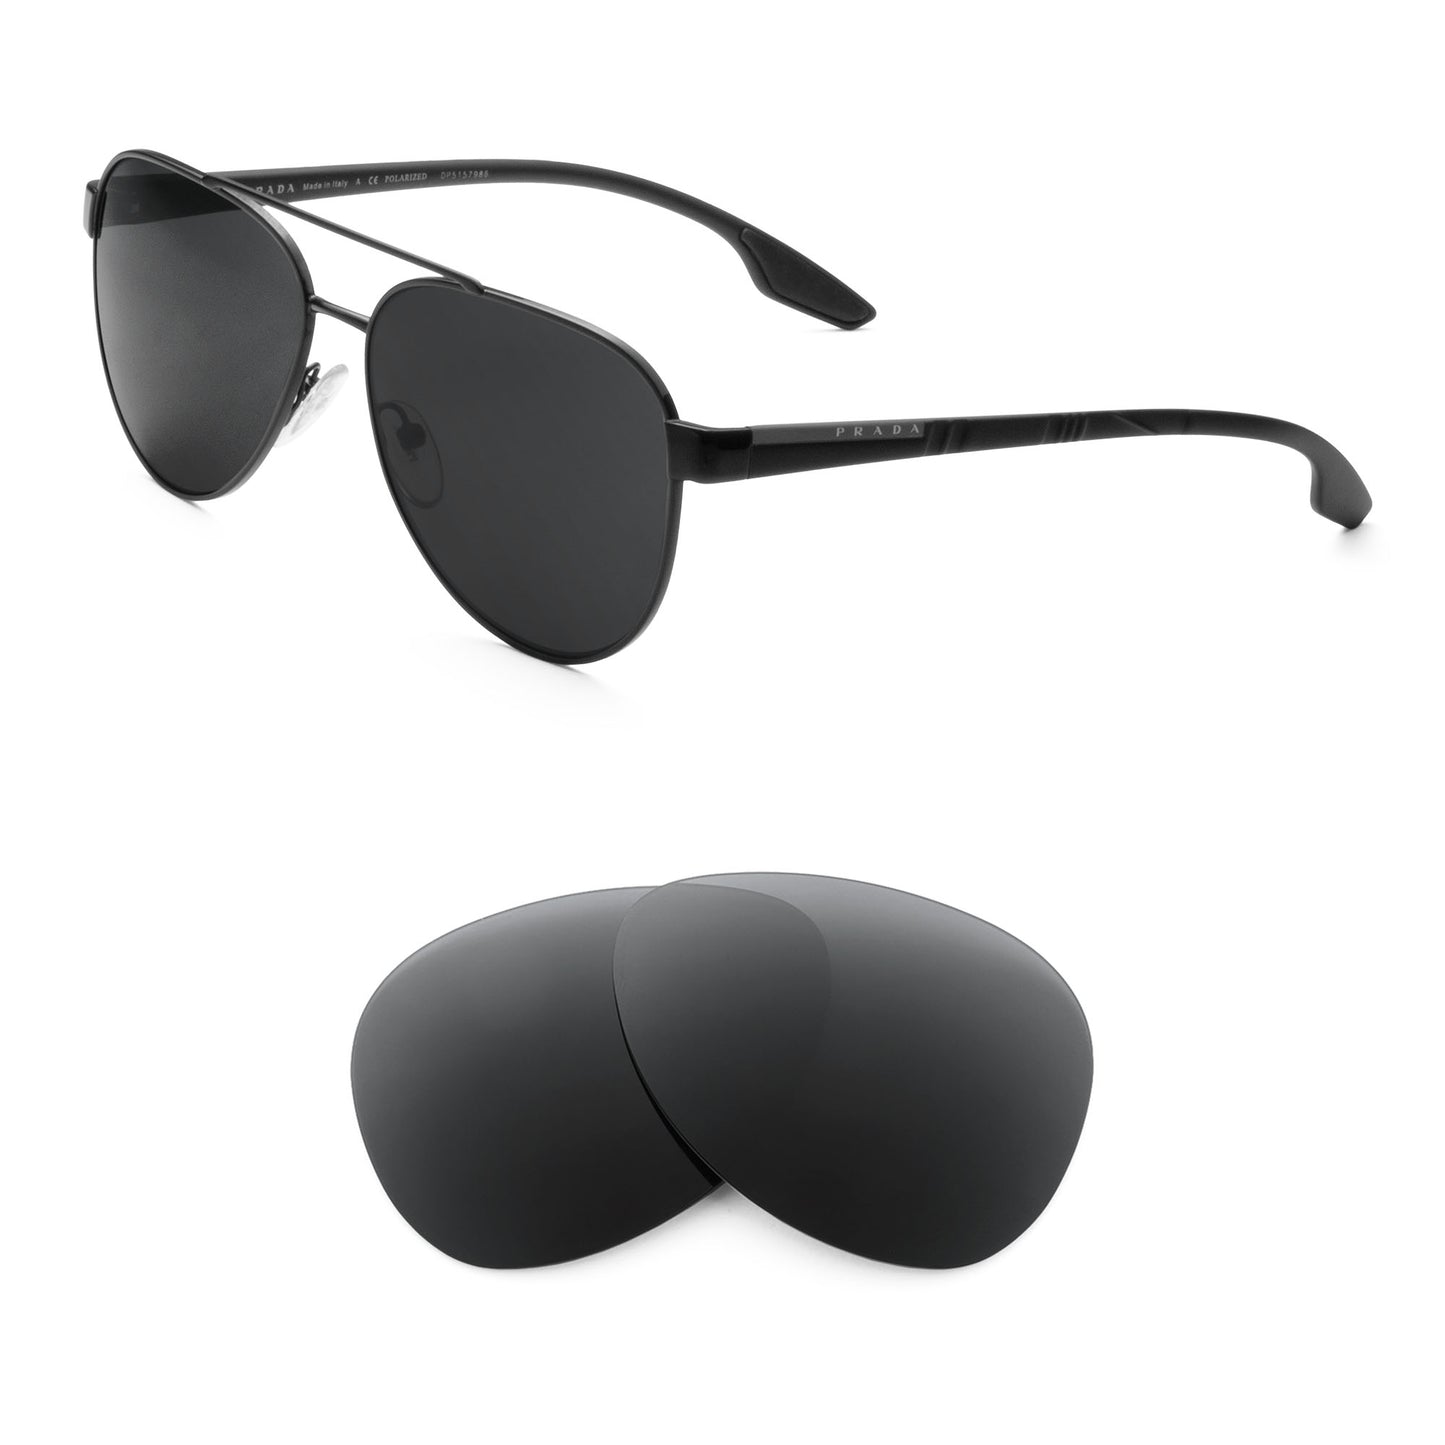 Prada PS 54TS sunglasses with replacement lenses